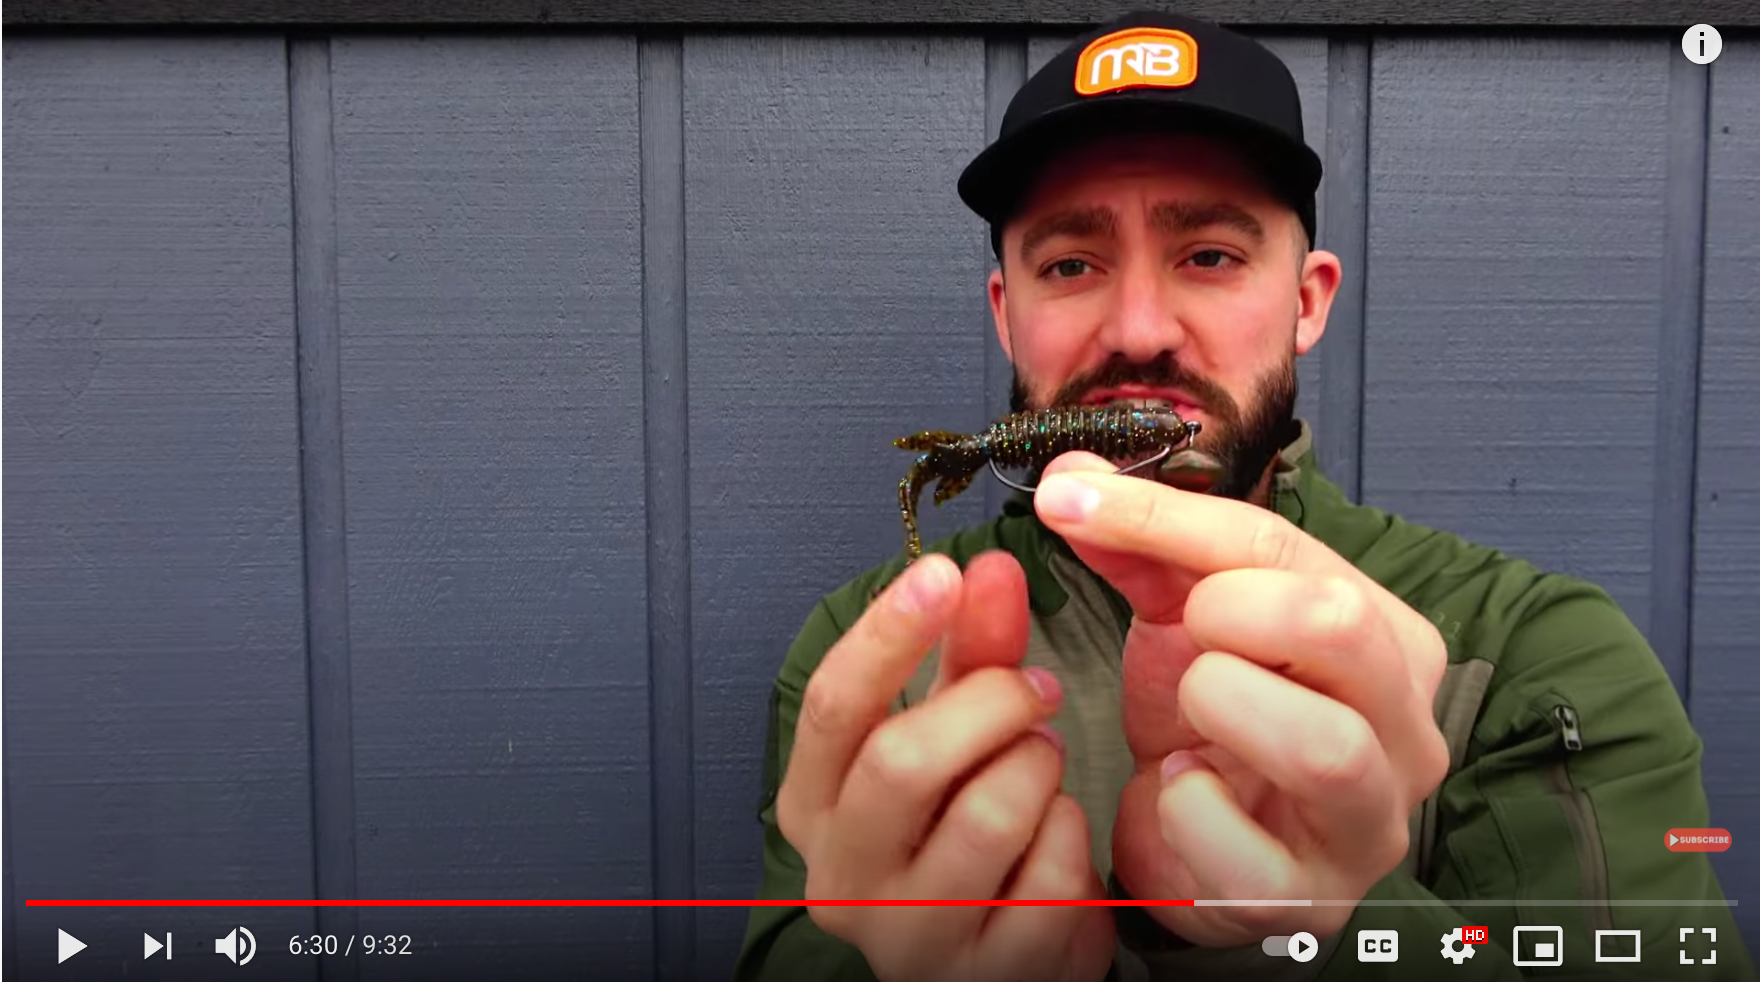 How To Rig Beaver Style Baits - Big Bite Baits BFE – MONSTERBASS